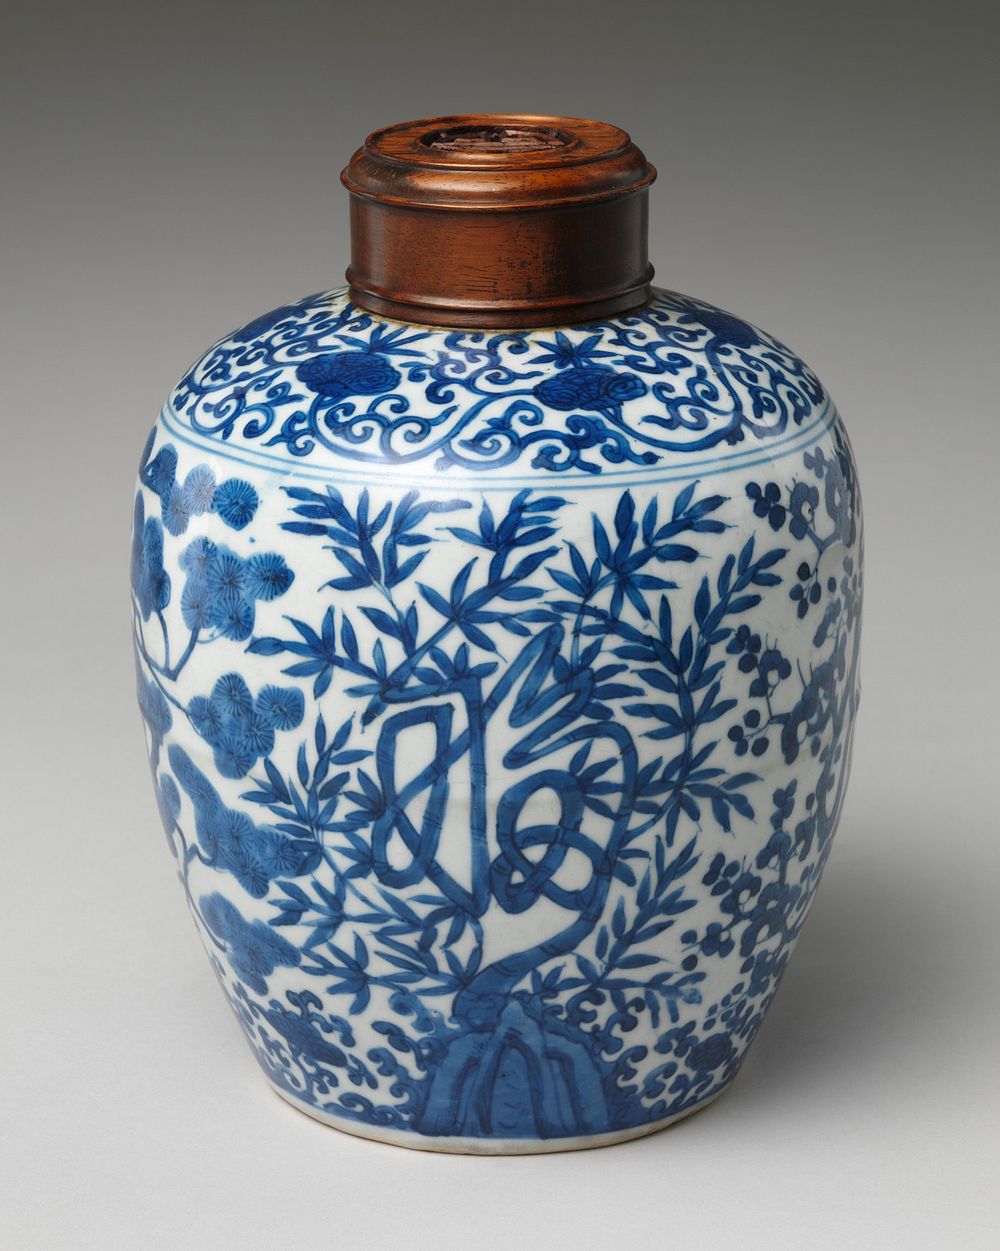 Jar decorated with auspicious characters amid plants